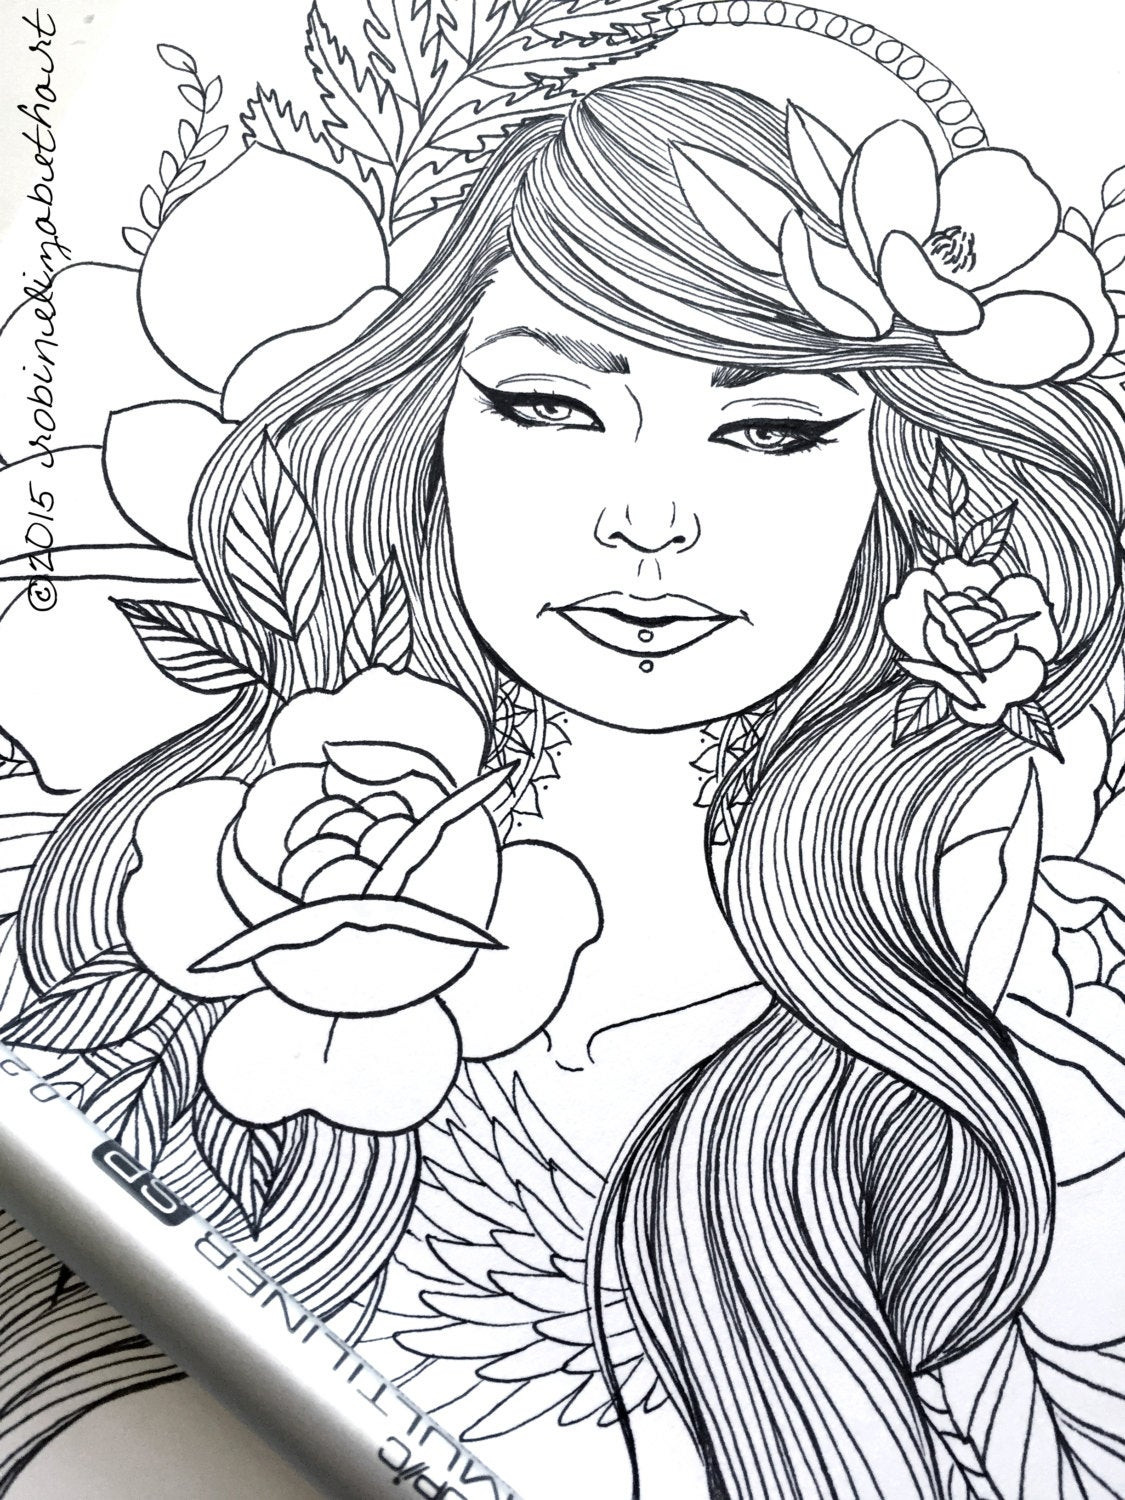 Coloring Pages For Adults Girls
 Girls with Tattoos Pack Adult Coloring Pages Magnolias